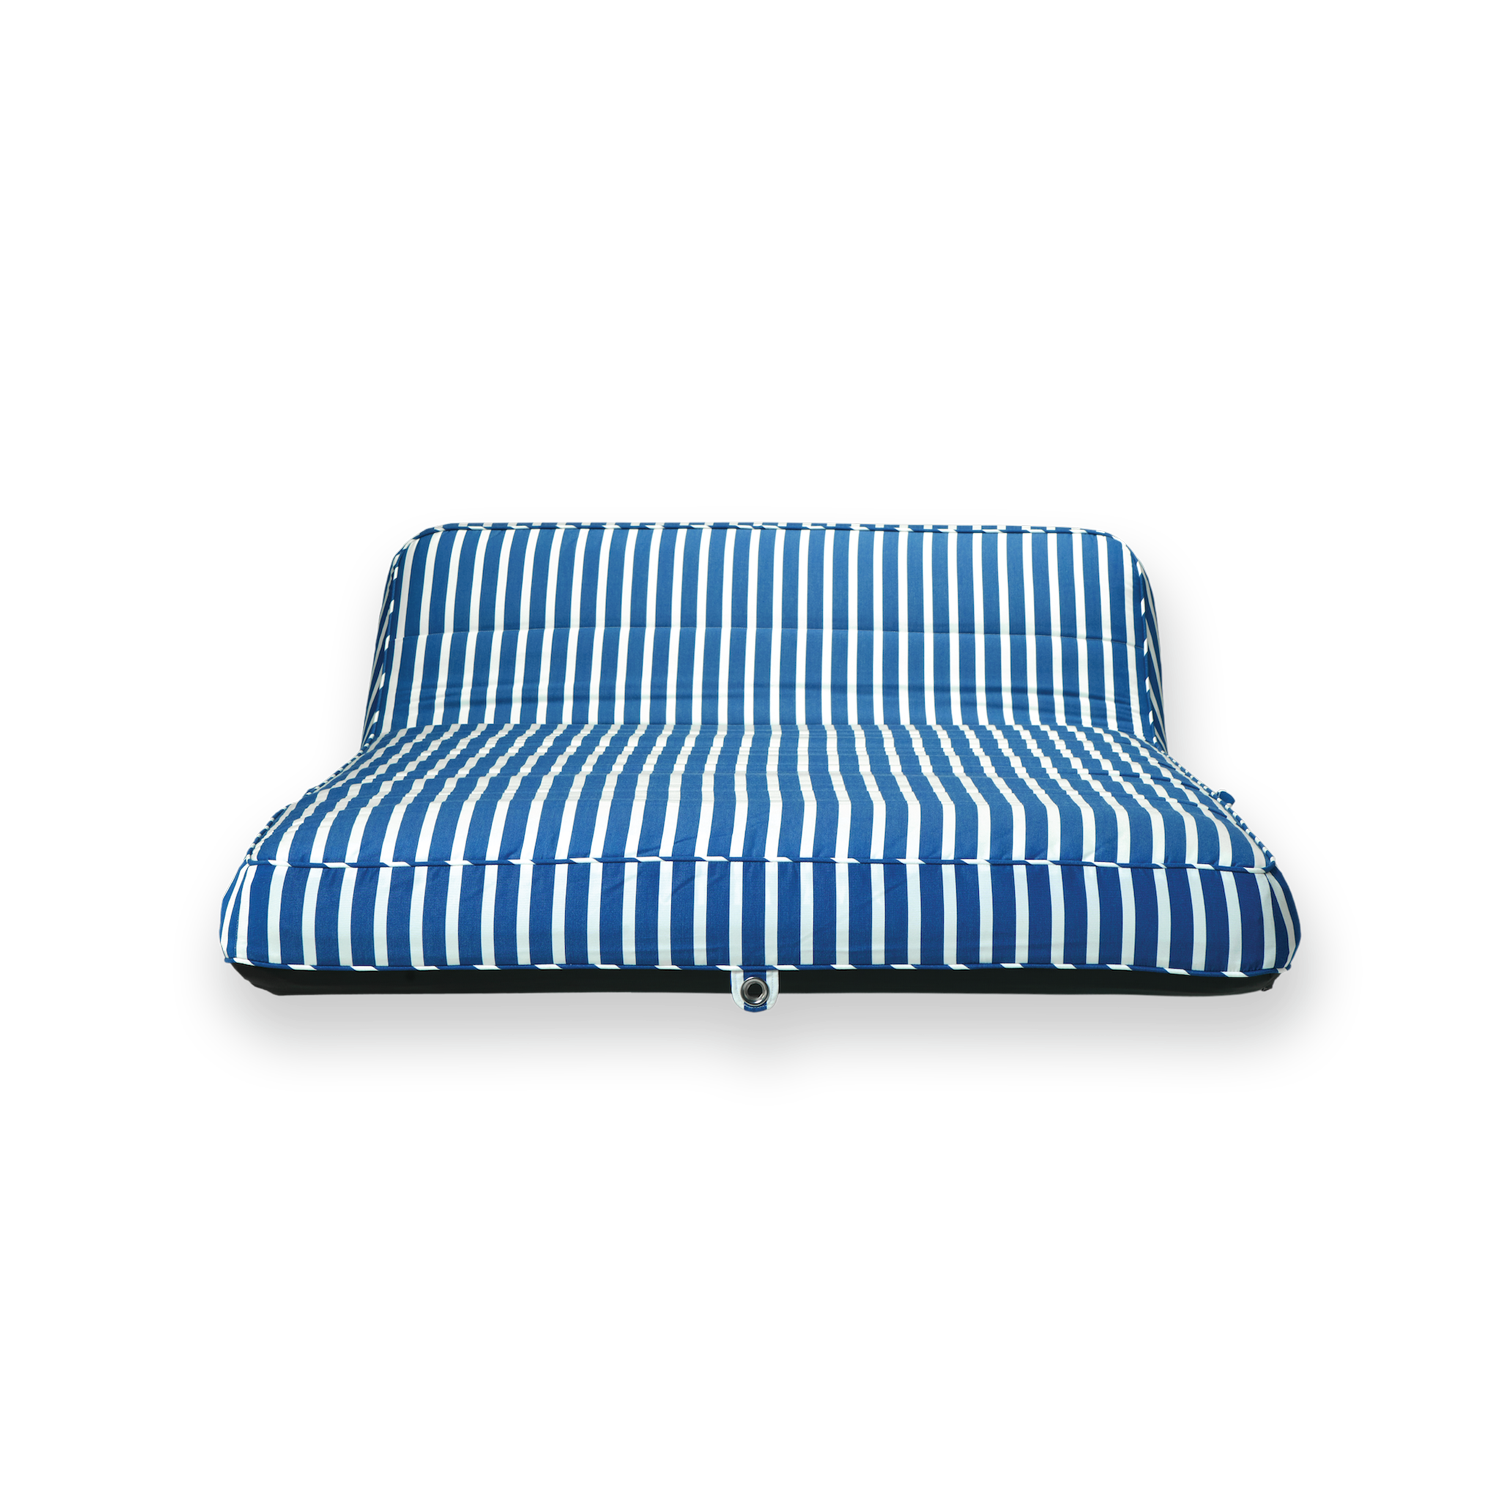 The front profile of a double blue and white striped fabric luxury pool float.